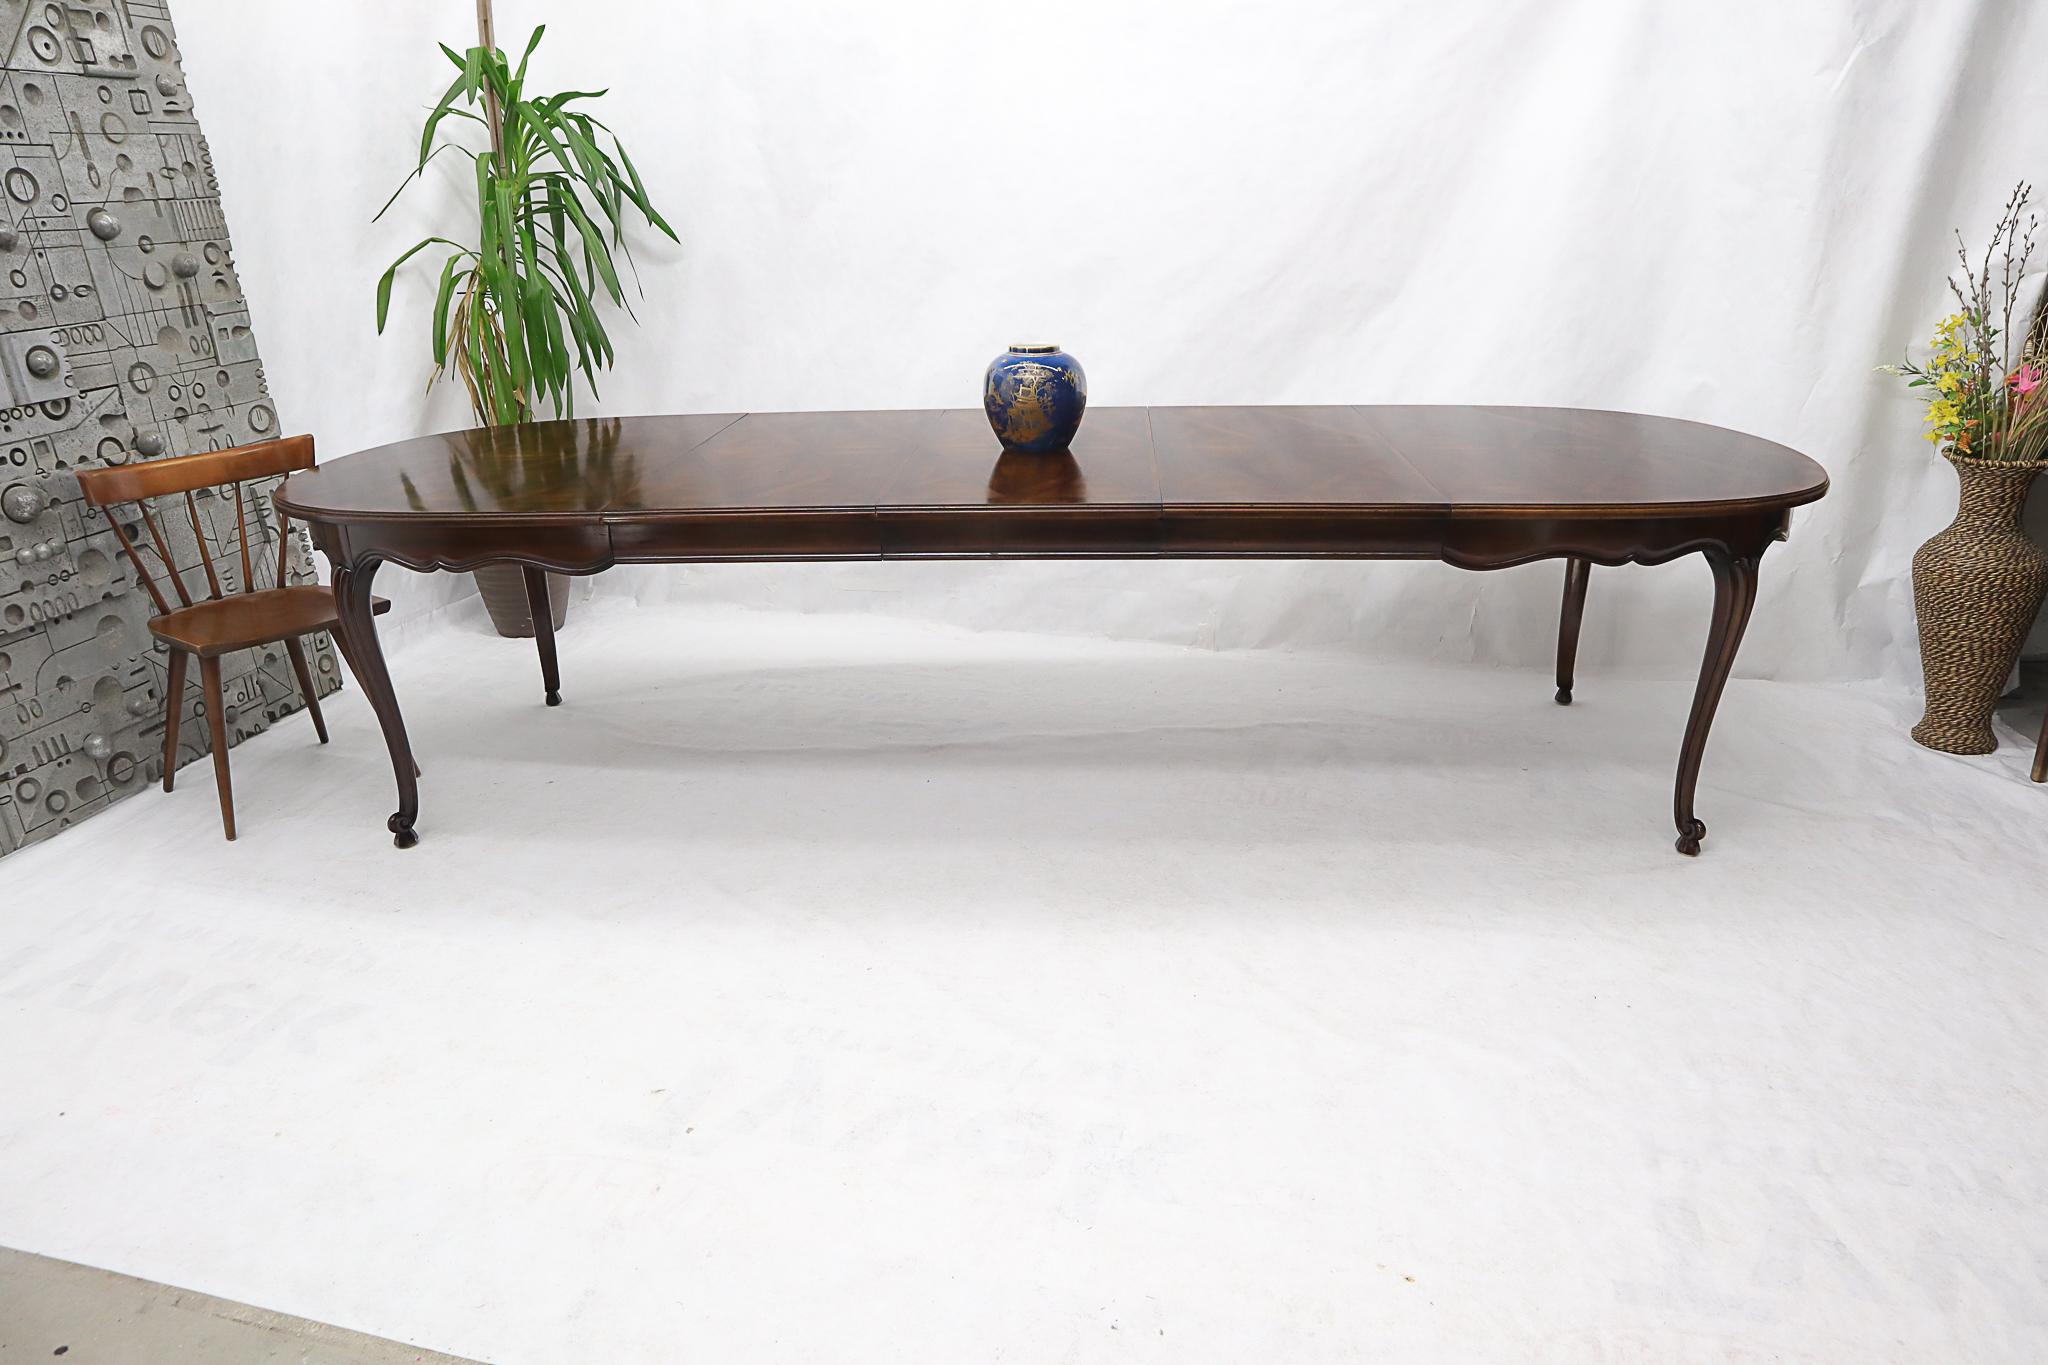 20th Century John Widdicomb Parquet Inlay Country French Dining Table with 3 Leaves